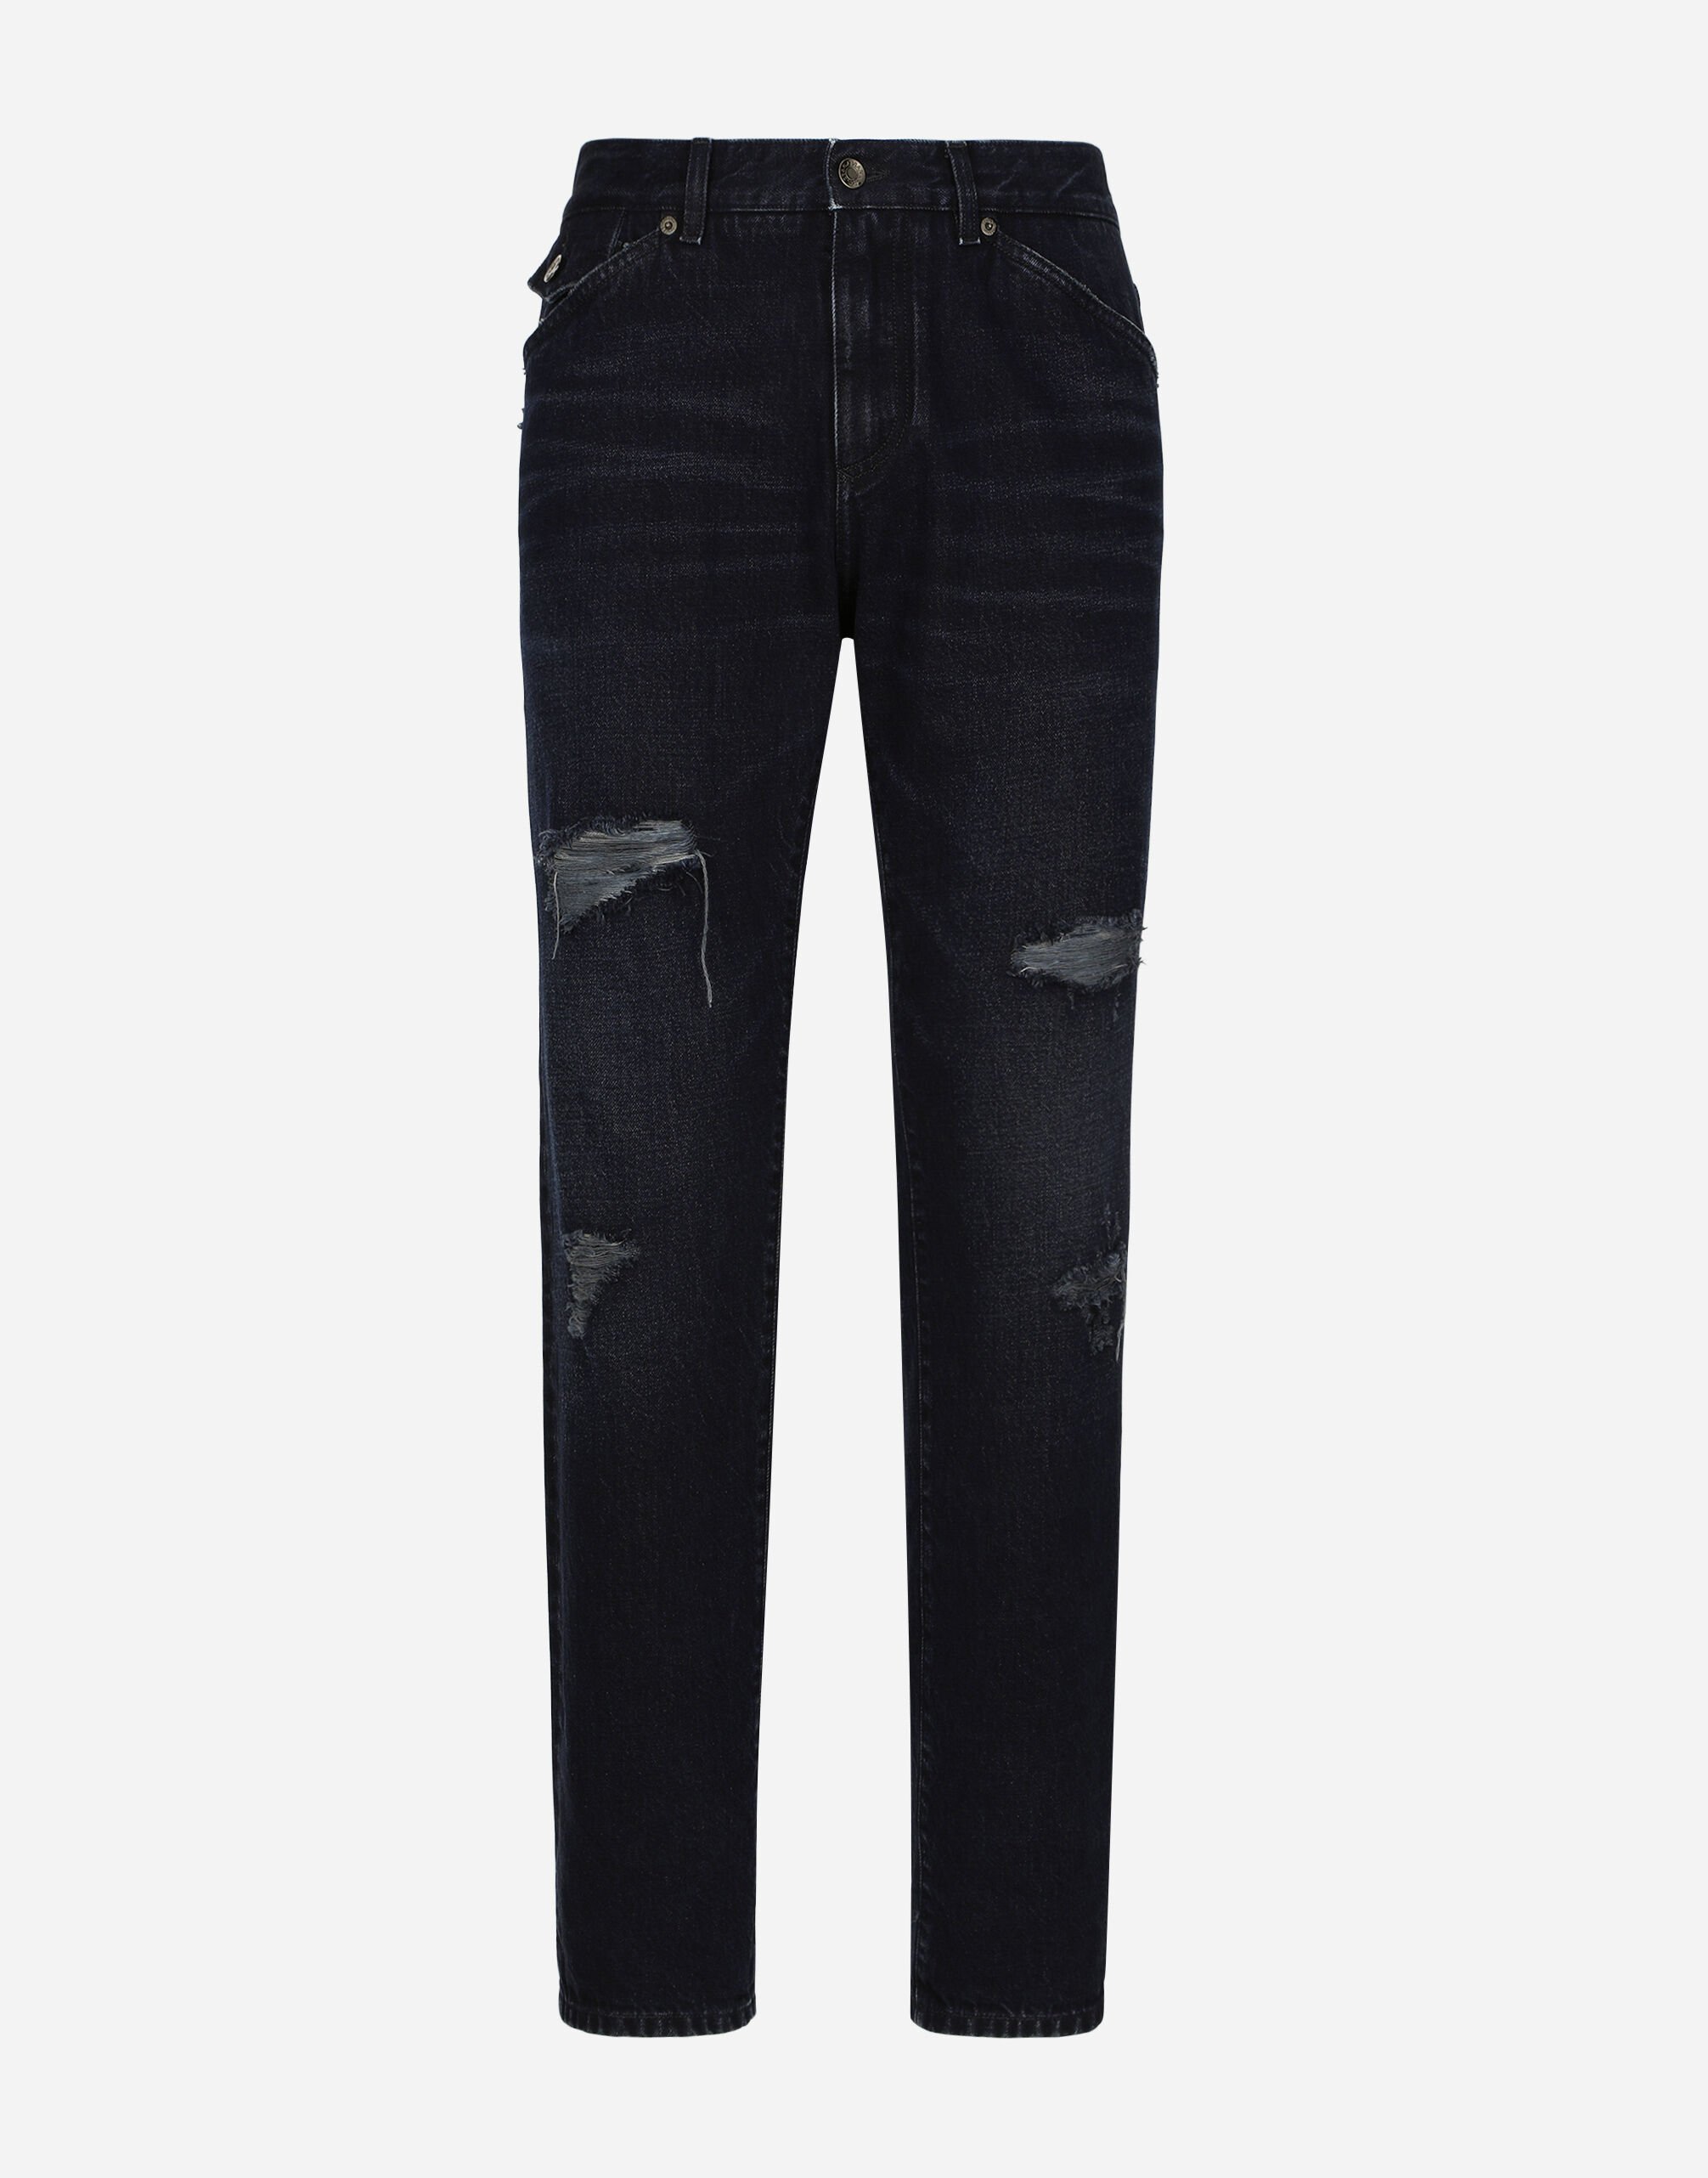 ${brand} Regular blue denim jeans with abrasions and rips ${colorDescription} ${masterID}